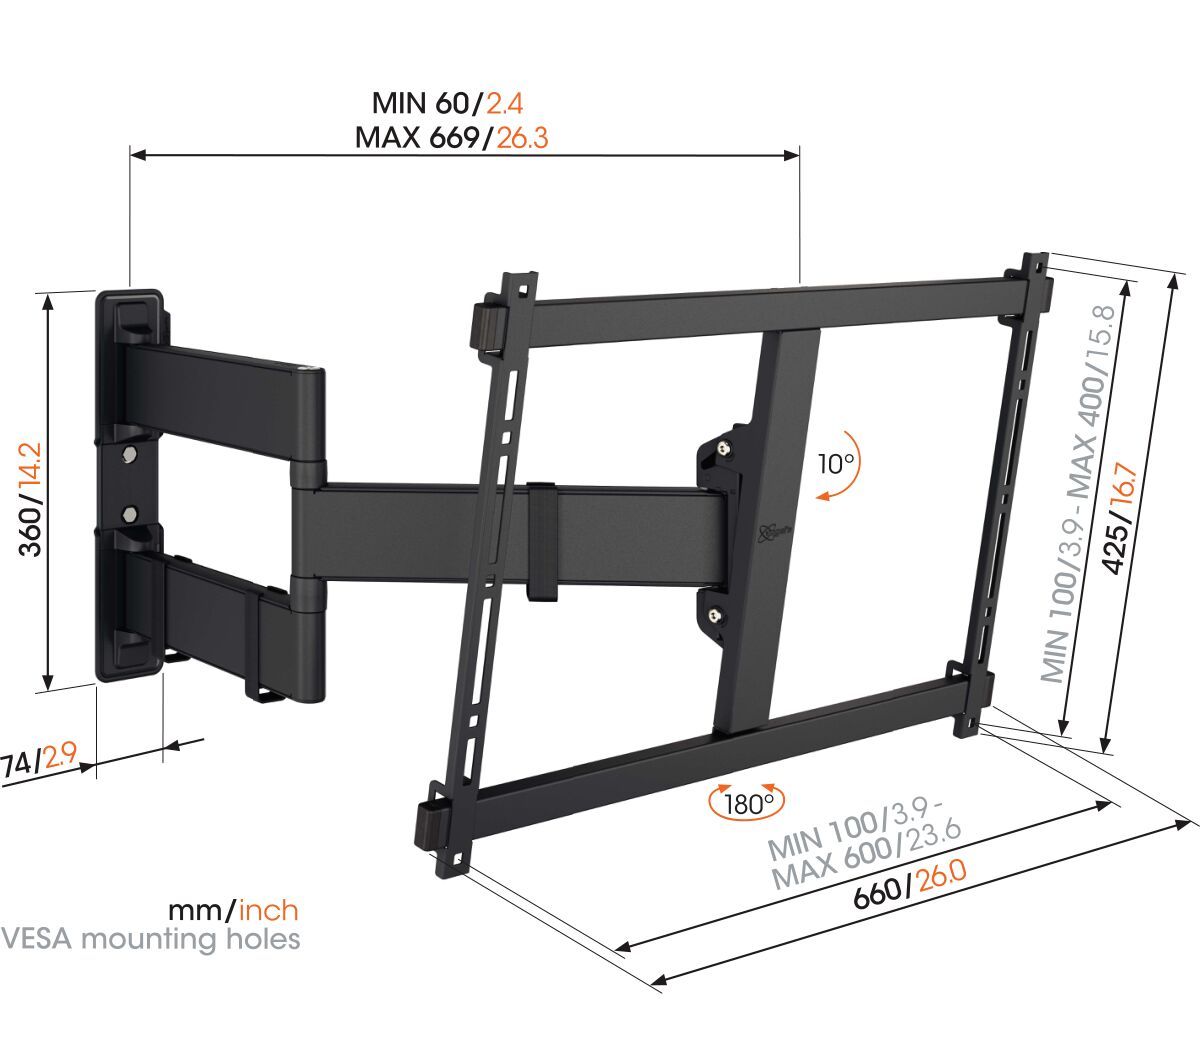 Vogel's TVM 3843 Full-Motion TV Wall Mount (black) - Suitable for 55 up to 100 inch TVs - Full motion (up to 180°) swivel - Tilt up to 10° - Dimensions